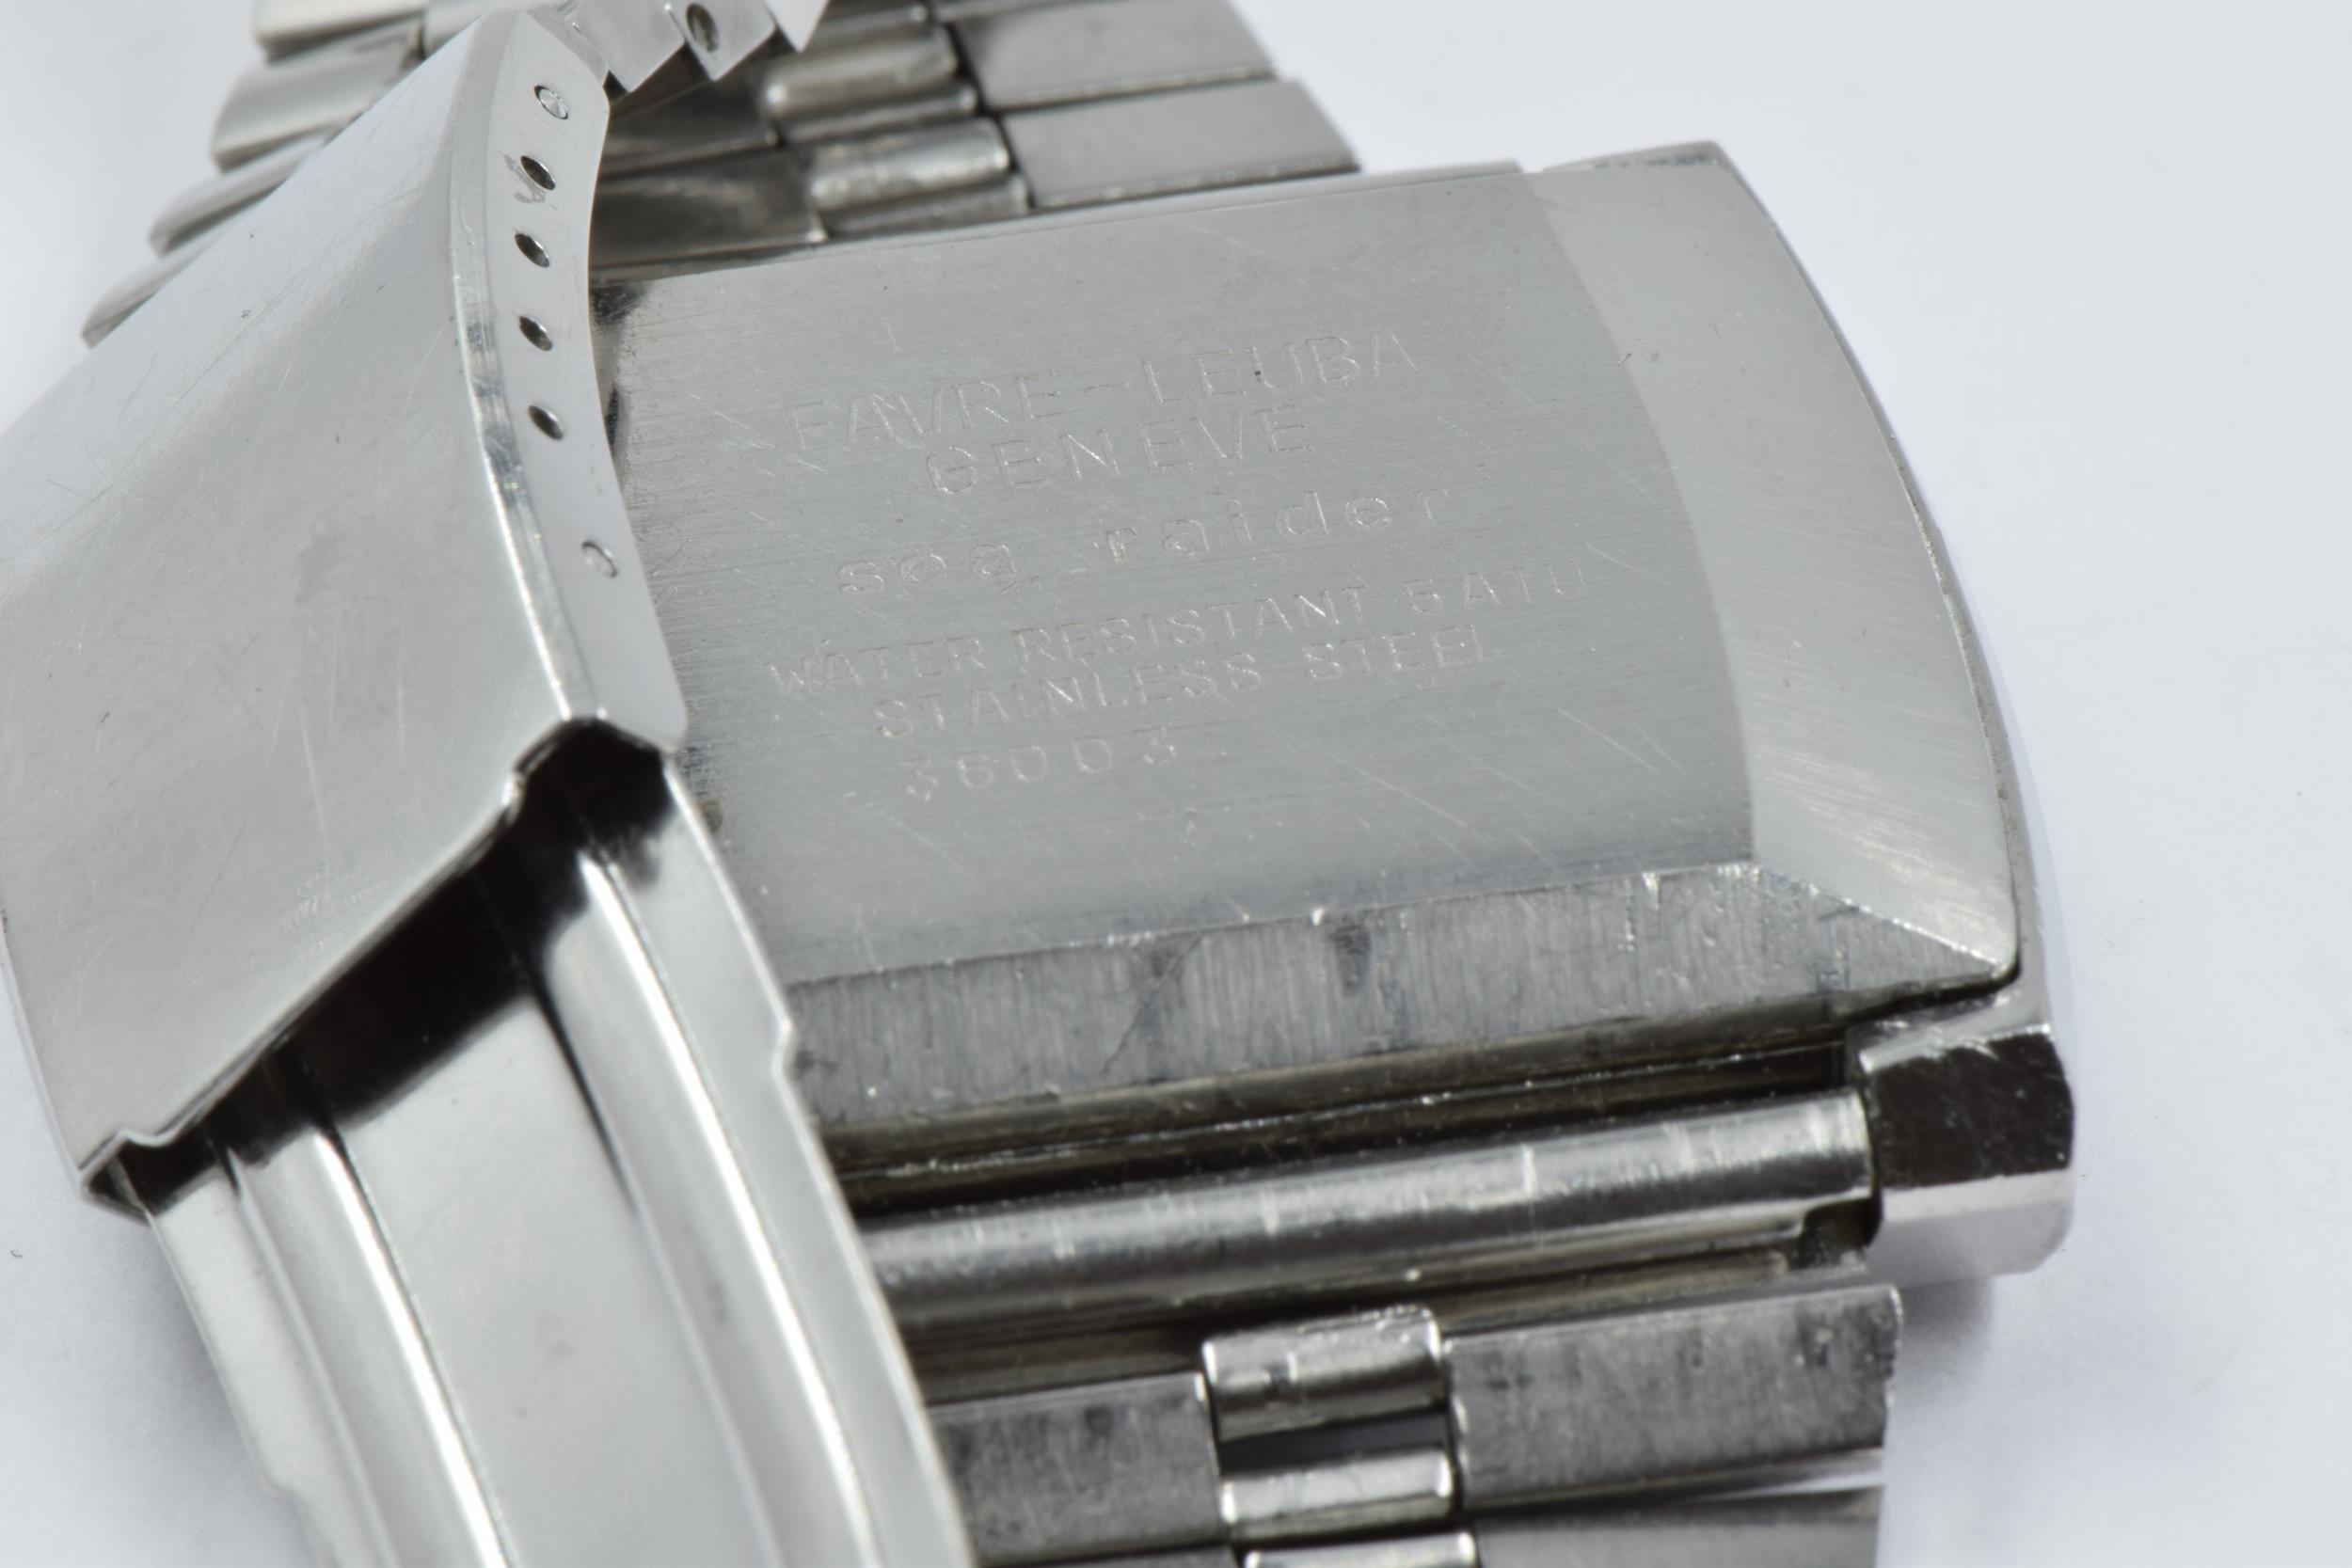 Favre-Leuba Sea Raider gentleman's rectangular stainless steel wristwatch, the silvered dial with - Image 2 of 2